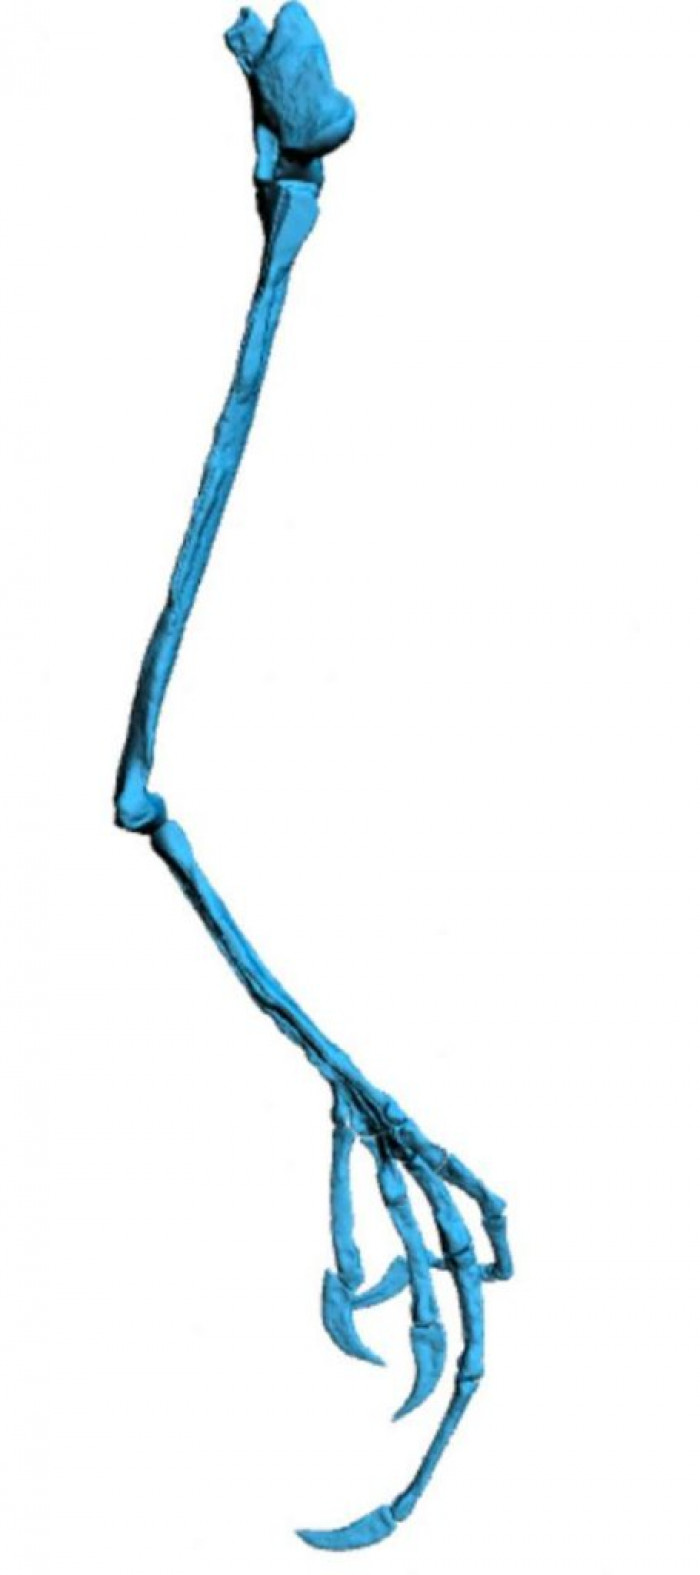 A reconstruction of the long-toed bird’s unusual limb.